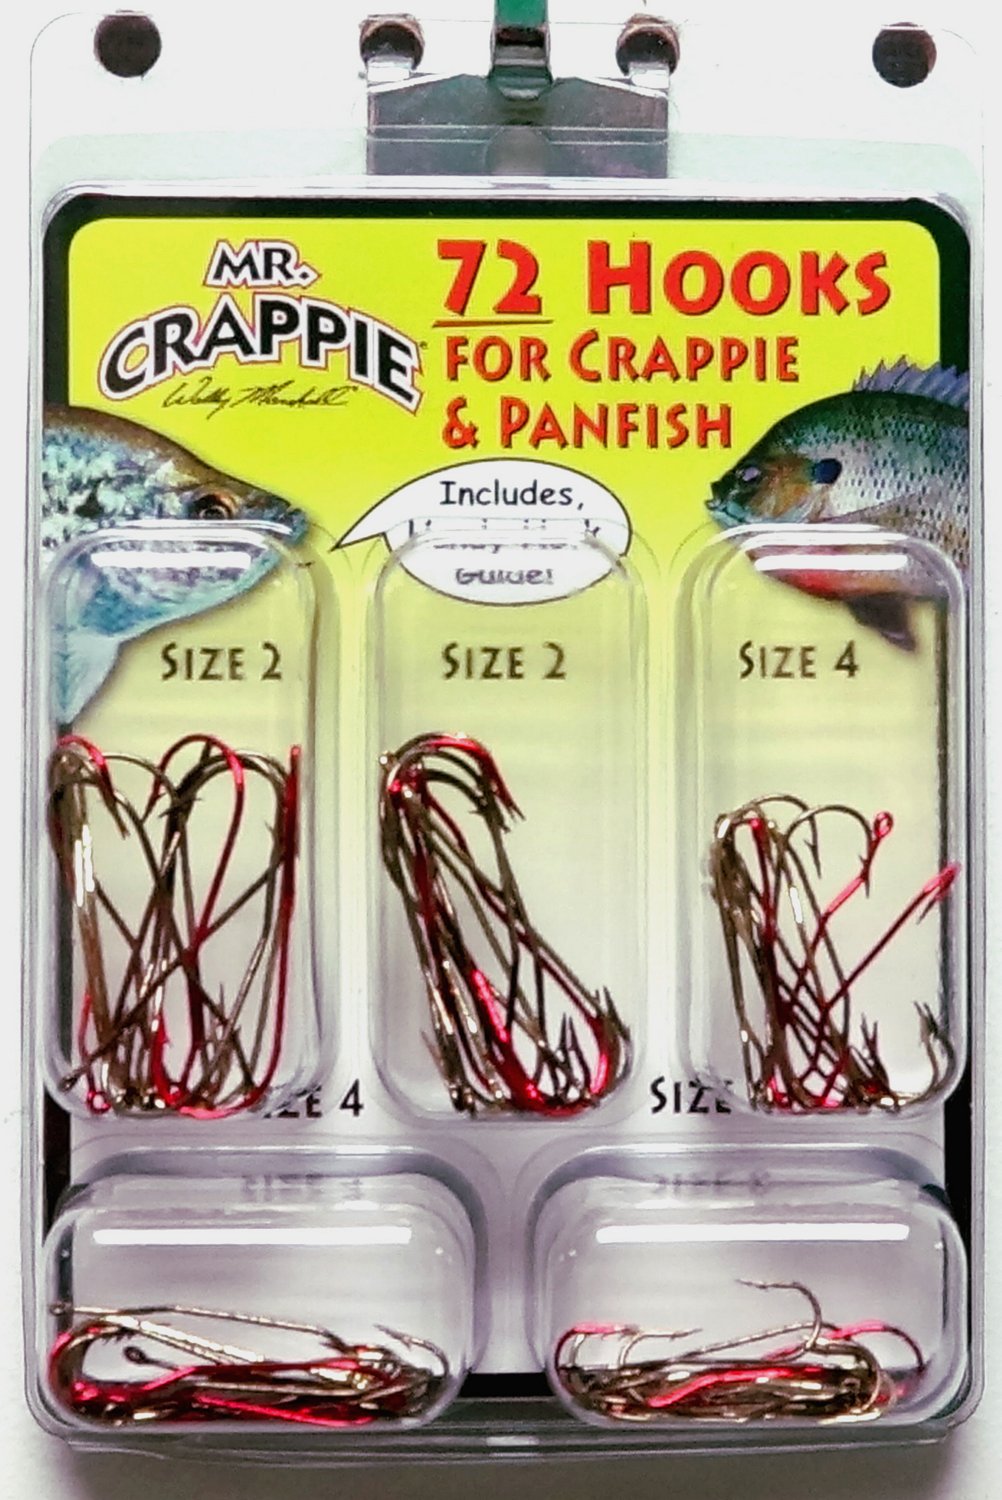 Crappie NOW - Digital Magazine, Ensure you keep crappie hooked with the  @MyTeamCrappie 72 Hook Kit! Packed with various colors and sizes, you'll  have all you need to kee